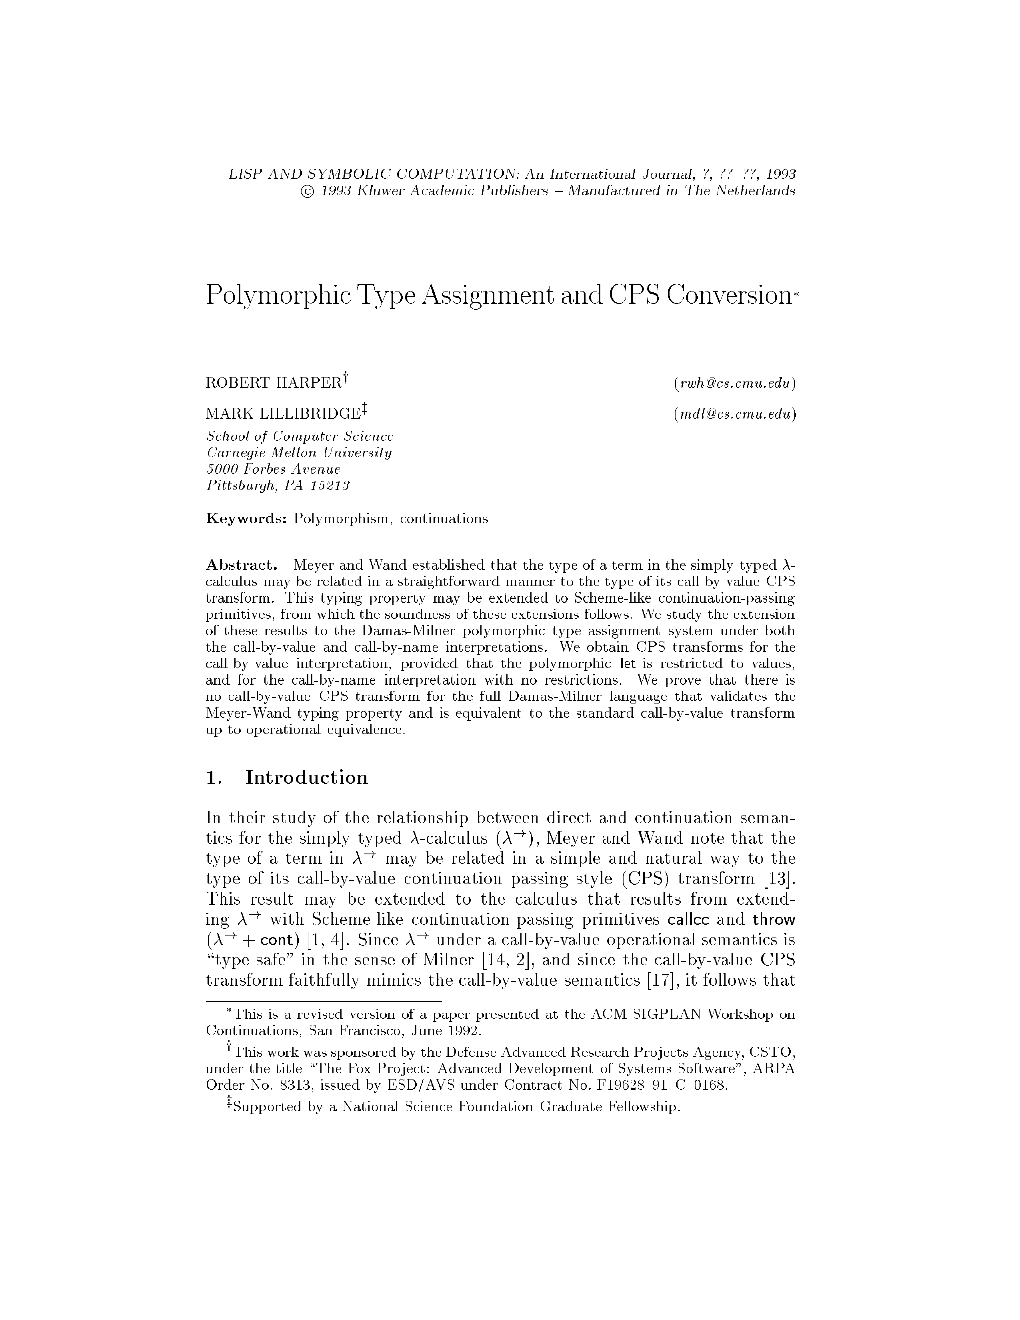 Polymorphic Type Assignment and Cps Conversion 3